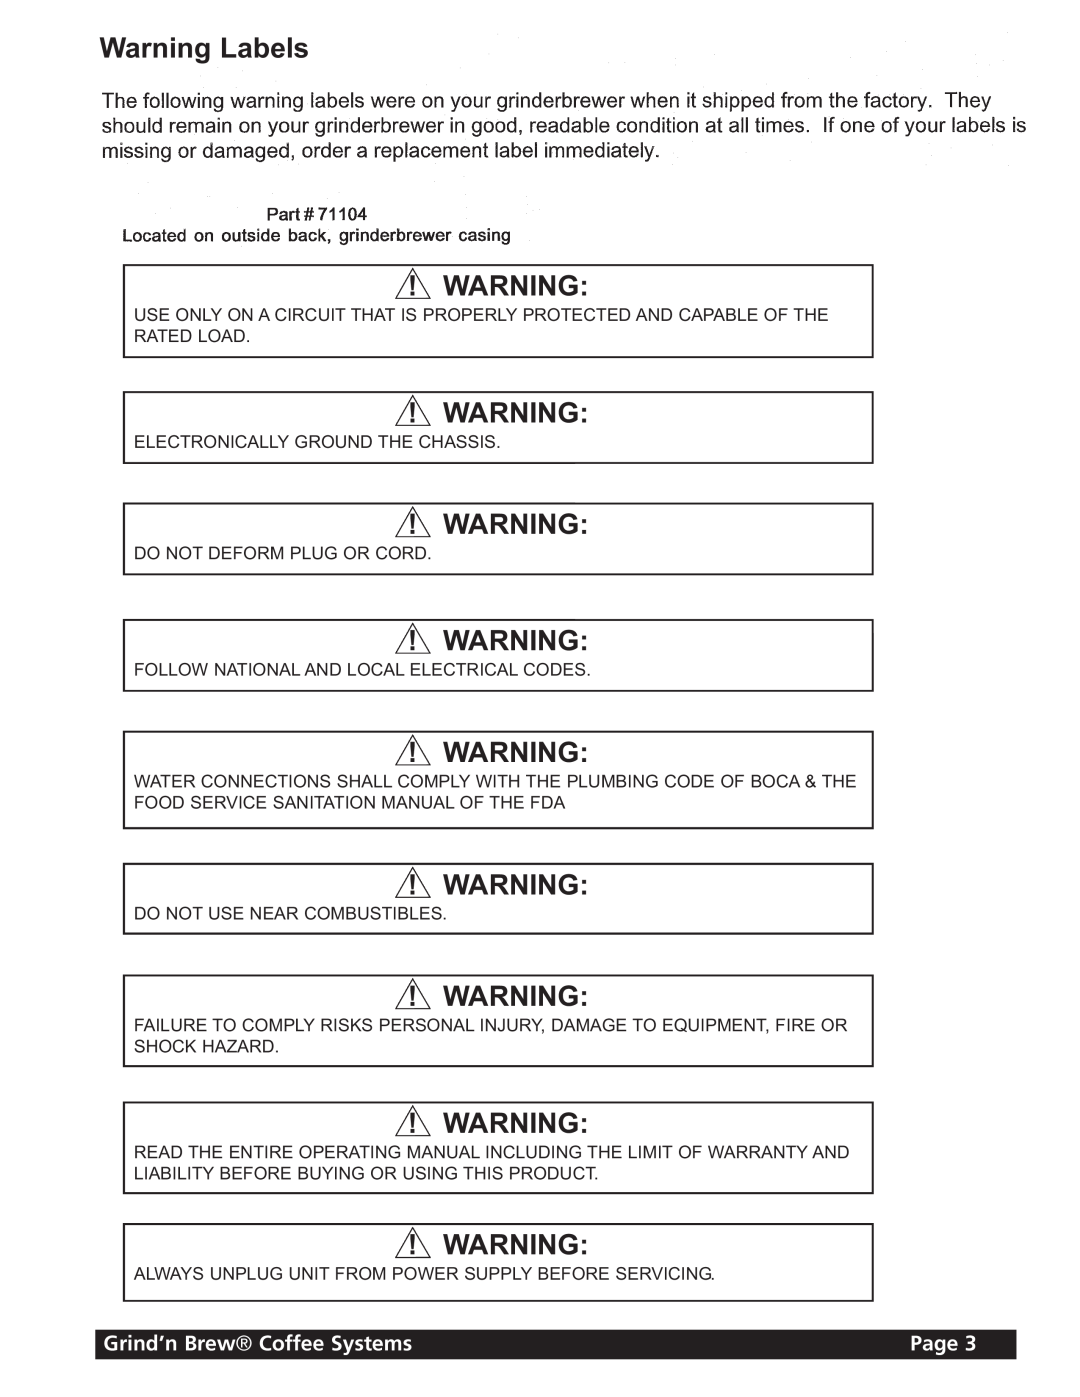 Grindmaster 11 instruction manual Warning Labels, Grind’n Brew Coffee Systems, Page 